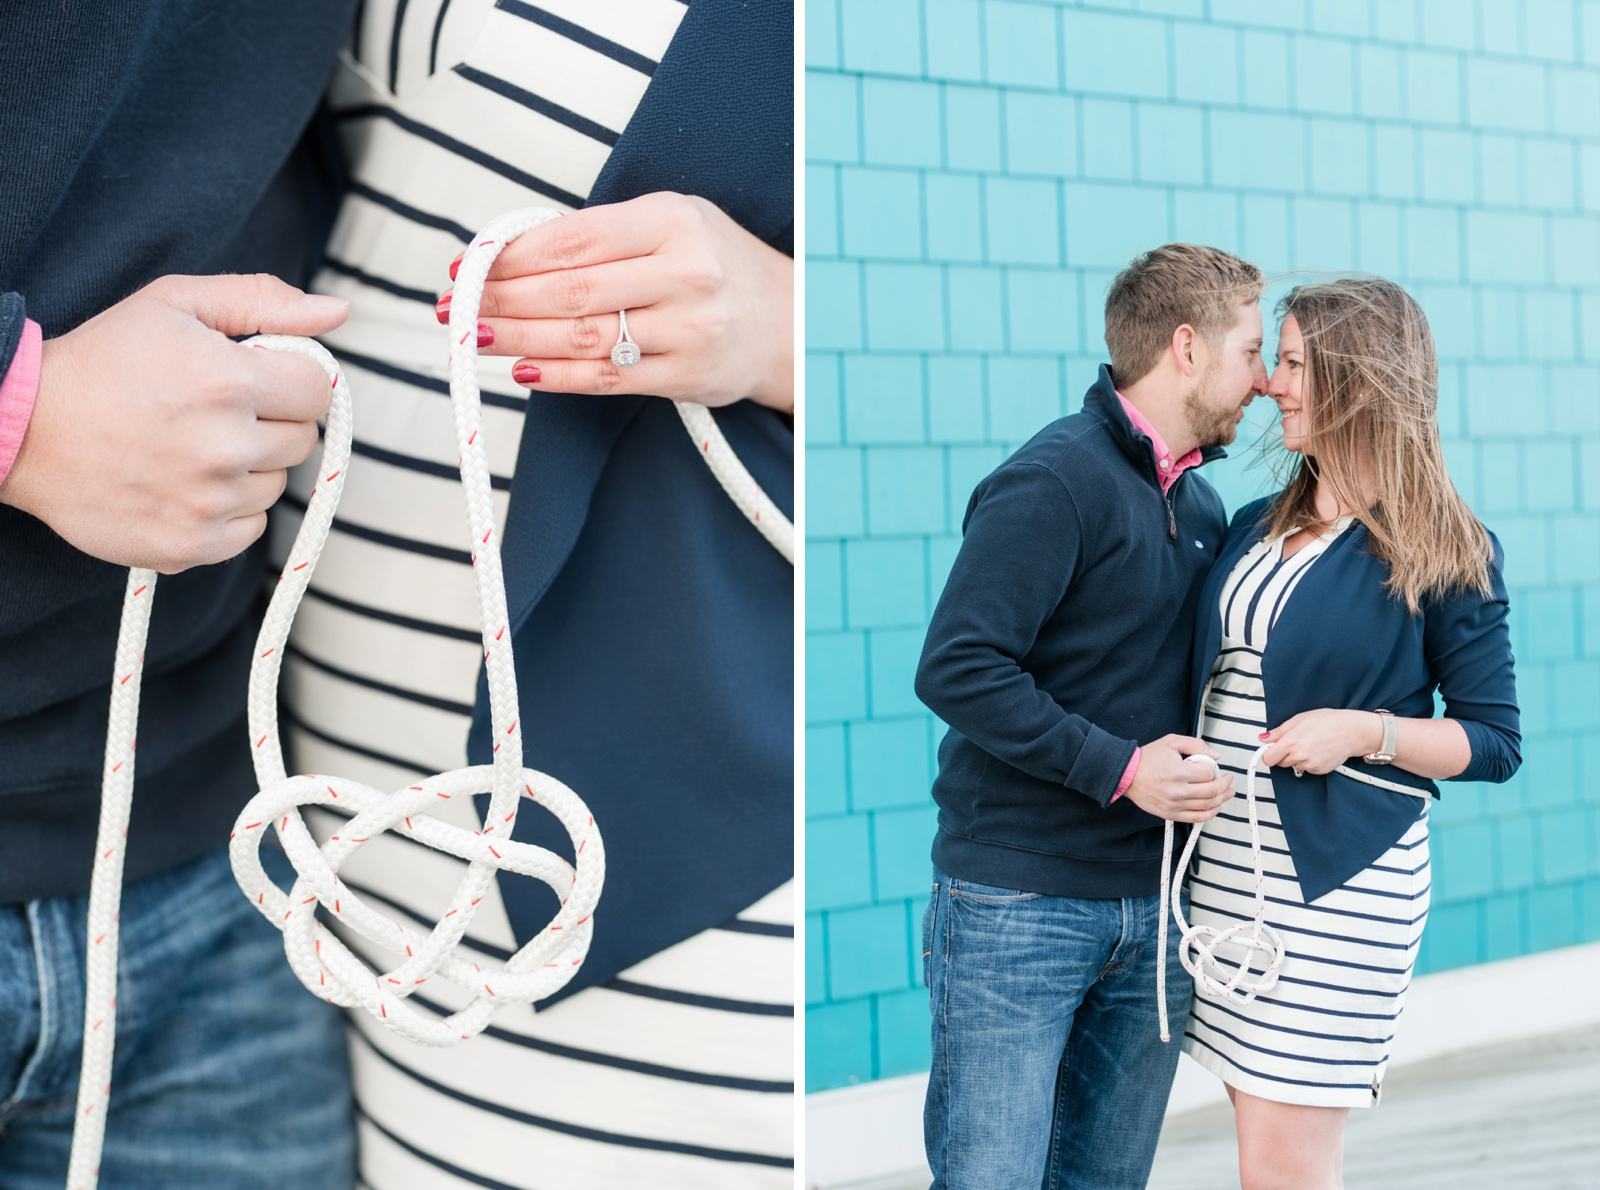 downtown-norfolk-winter-engagement-session-photo_7254.jpg